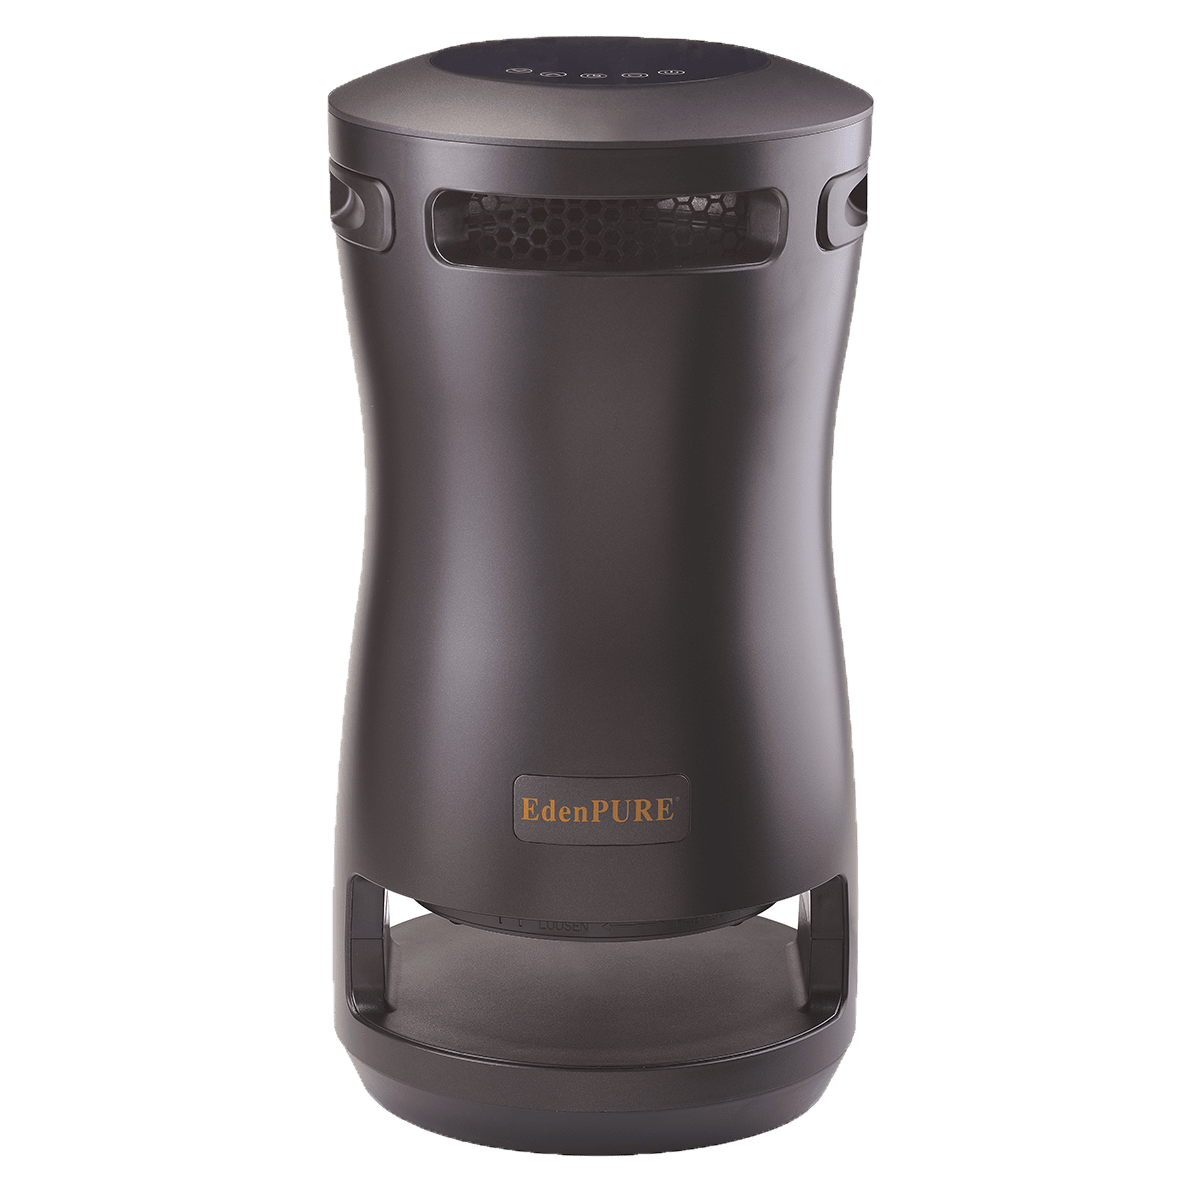 https://s3-assets.sylvane.com/media/images/products/edenpure-360-super-climater-space-heater-main-1.png